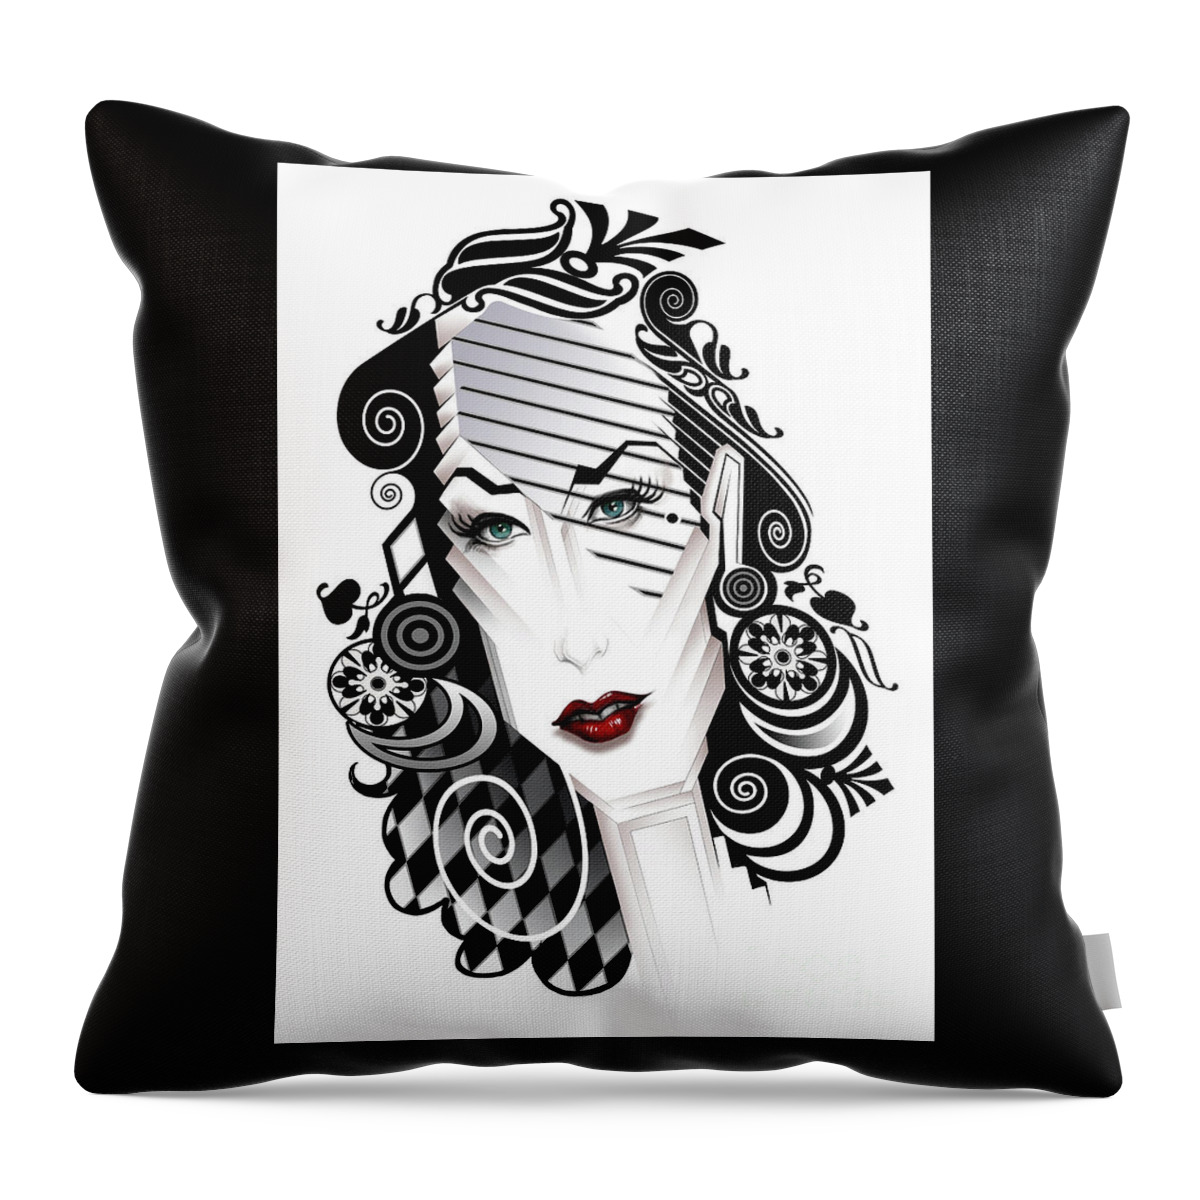 Dita Von Teese Throw Pillow featuring the drawing Dita Von Teese by Andre Koekemoer